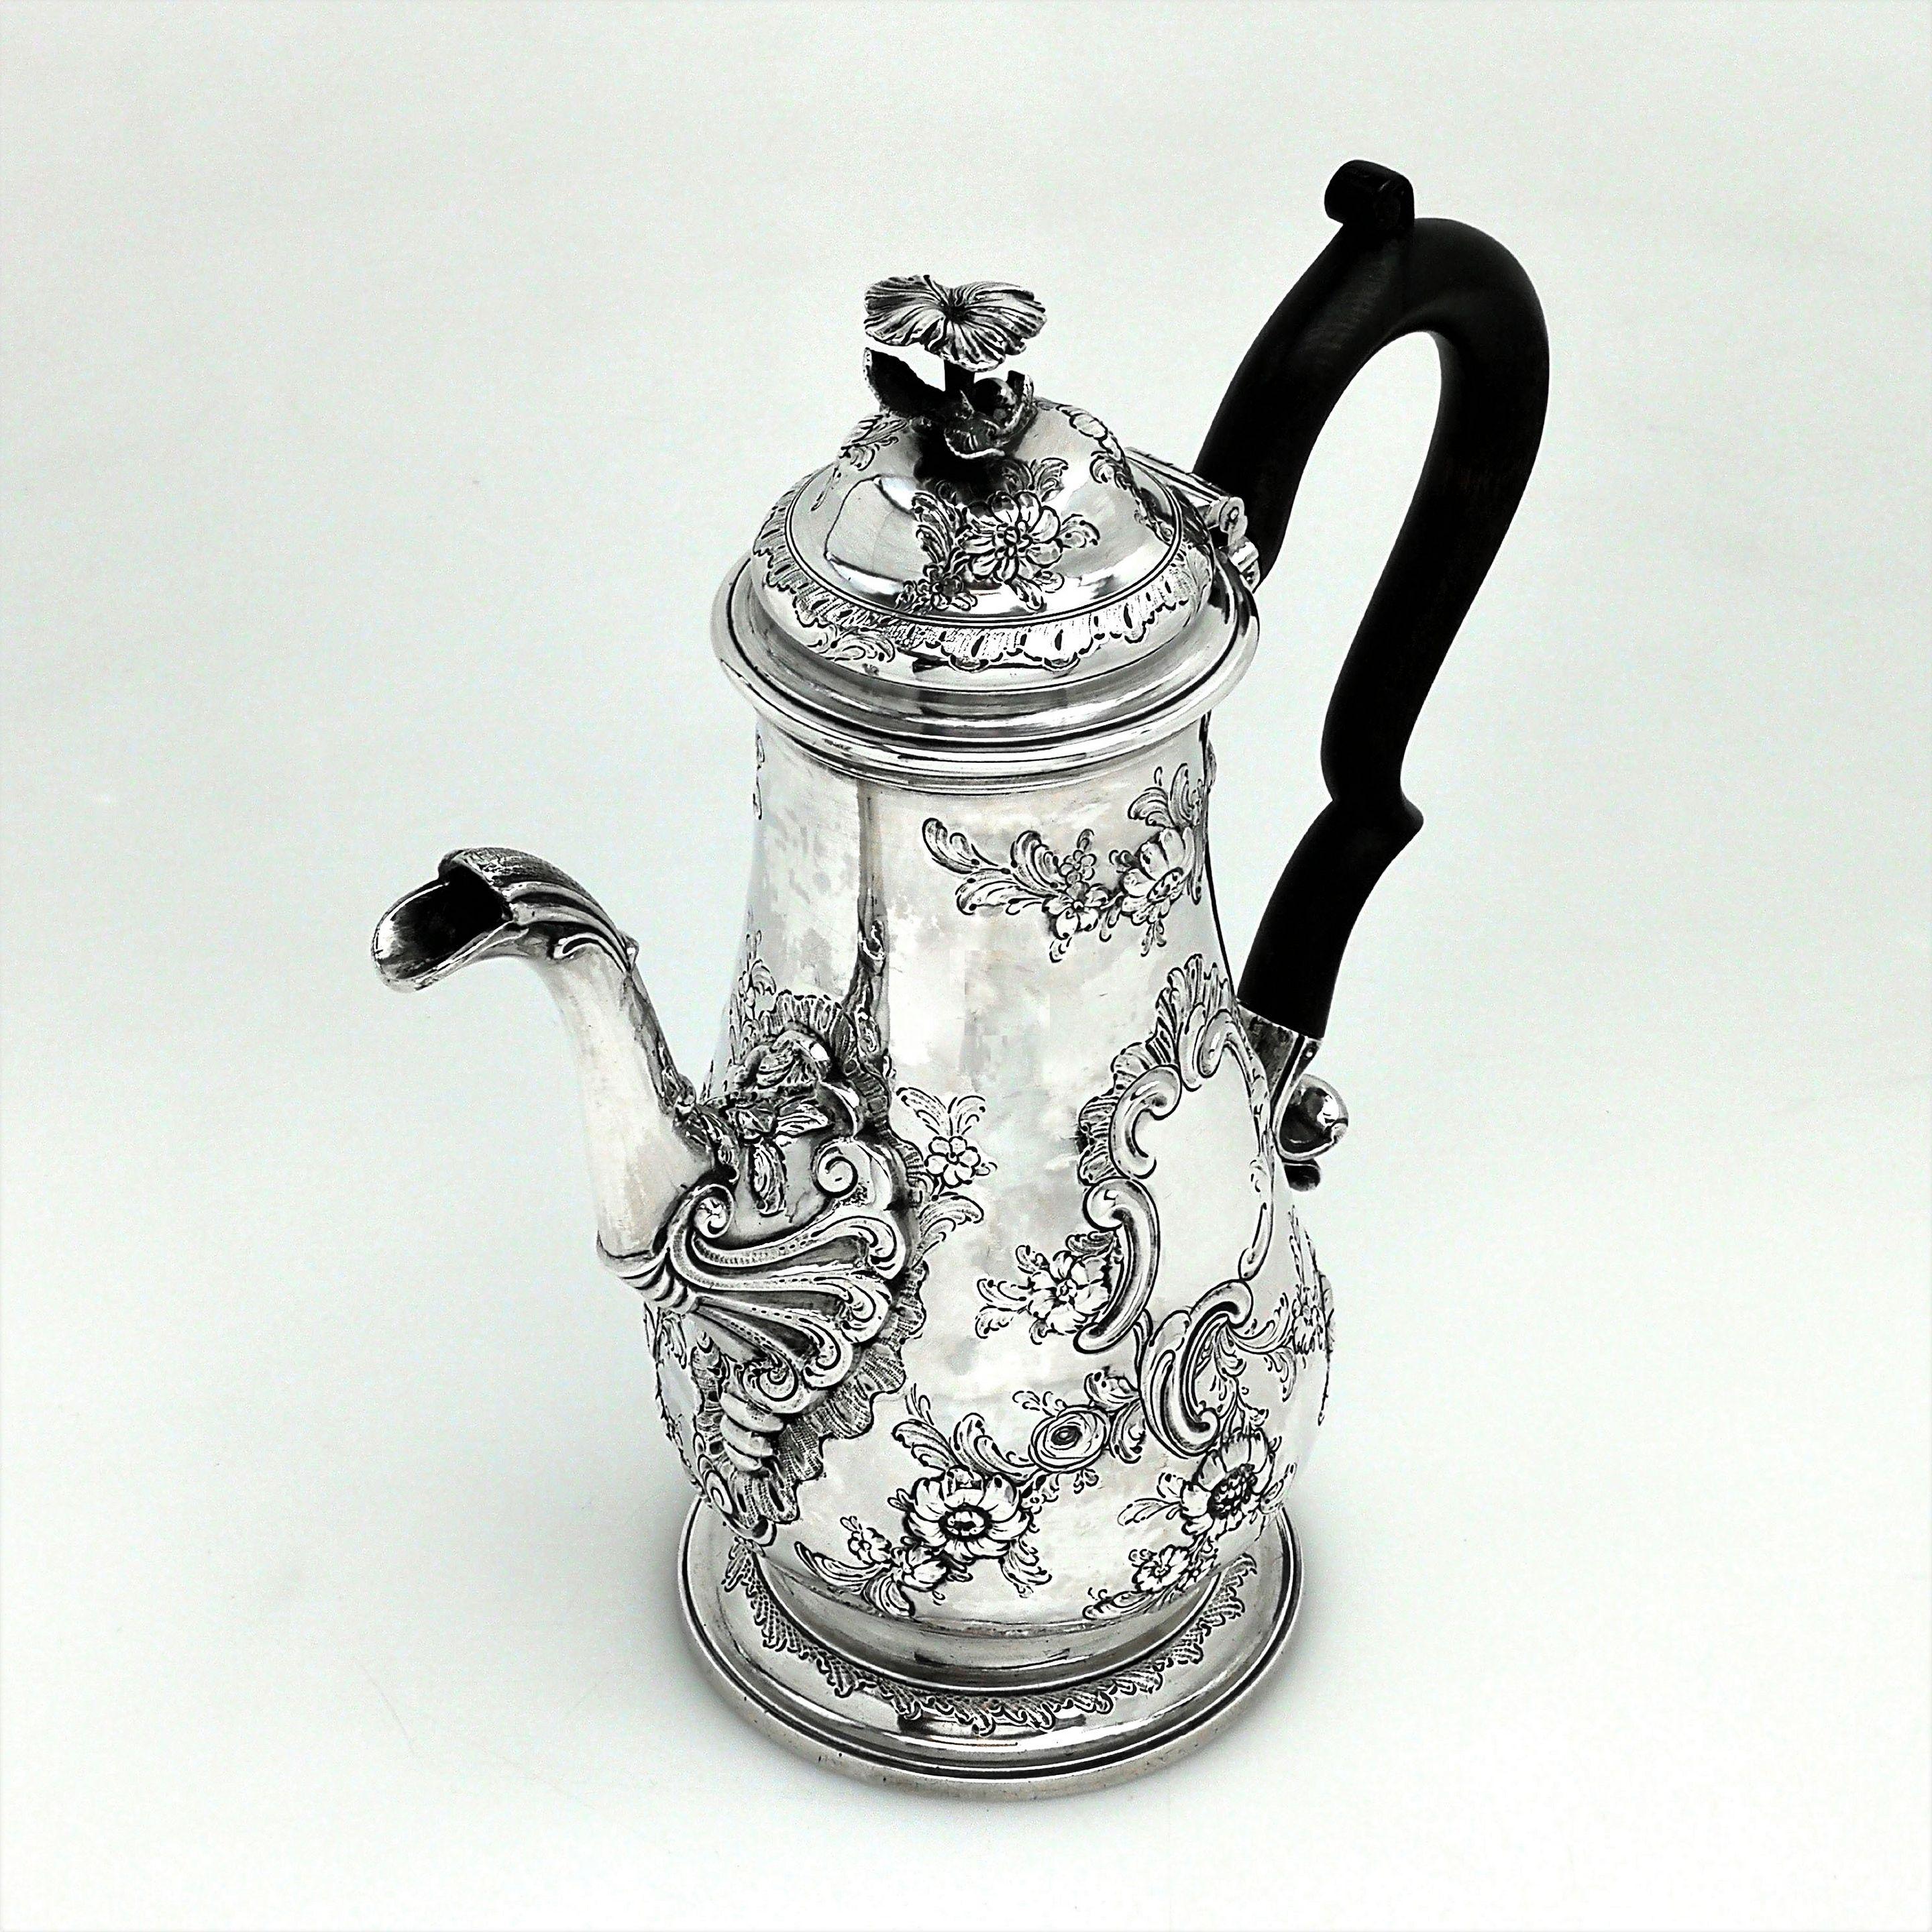 A magnificent antique George III solid silver coffee pot. This coffee pot features a beautiful chased floral and scroll design. The coffee pot stands on a spread foot and has a dark wood handle.
 
 Made in London in 1760 by John Bayley.
 
